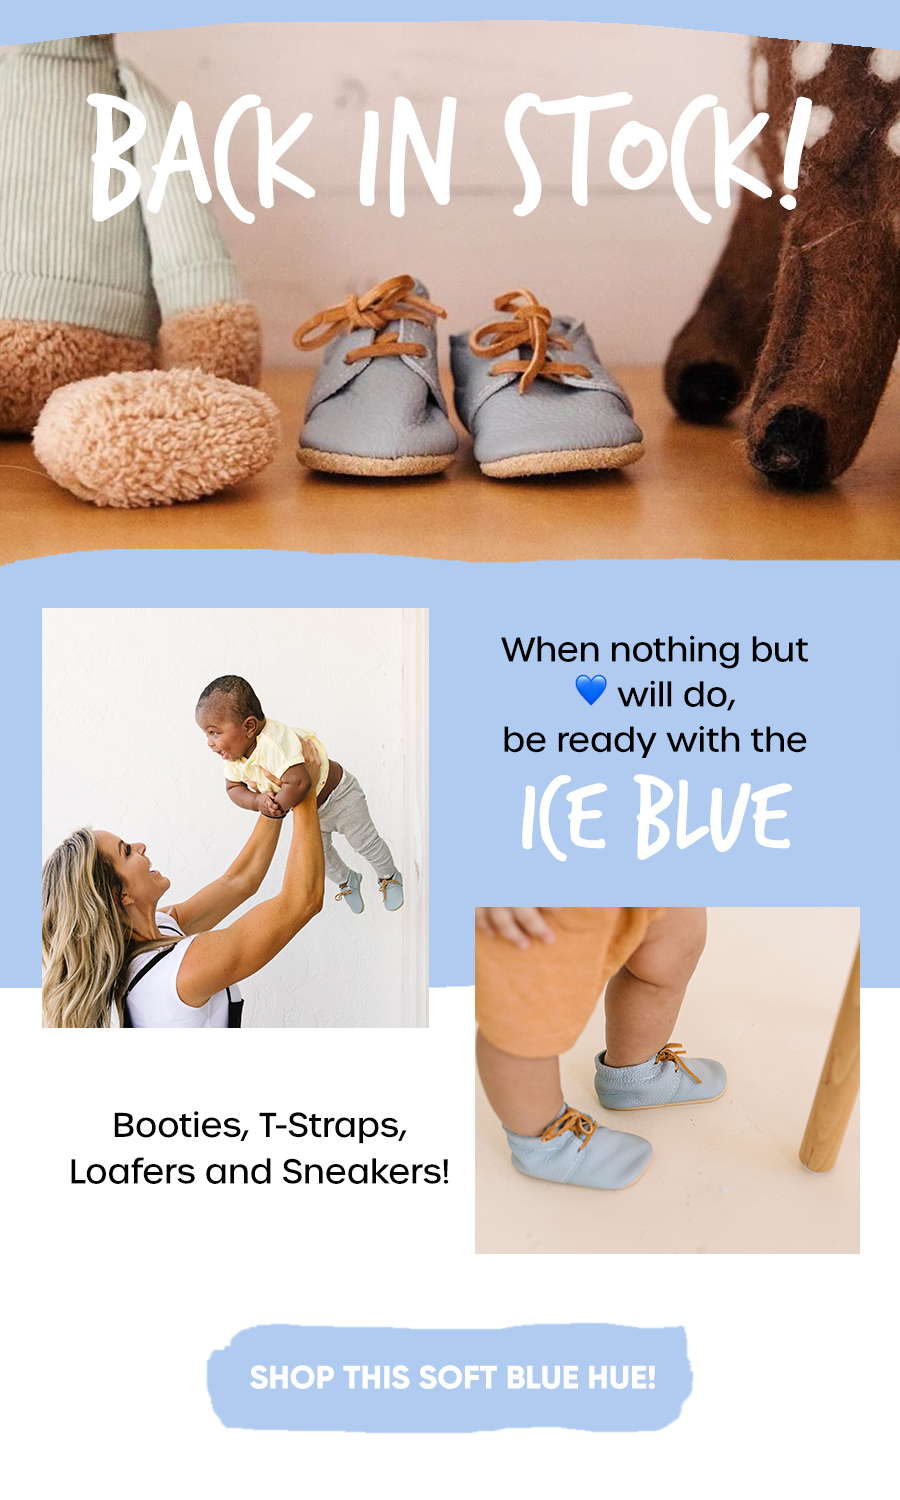 Back in Stock! Ice Blue Shoes!